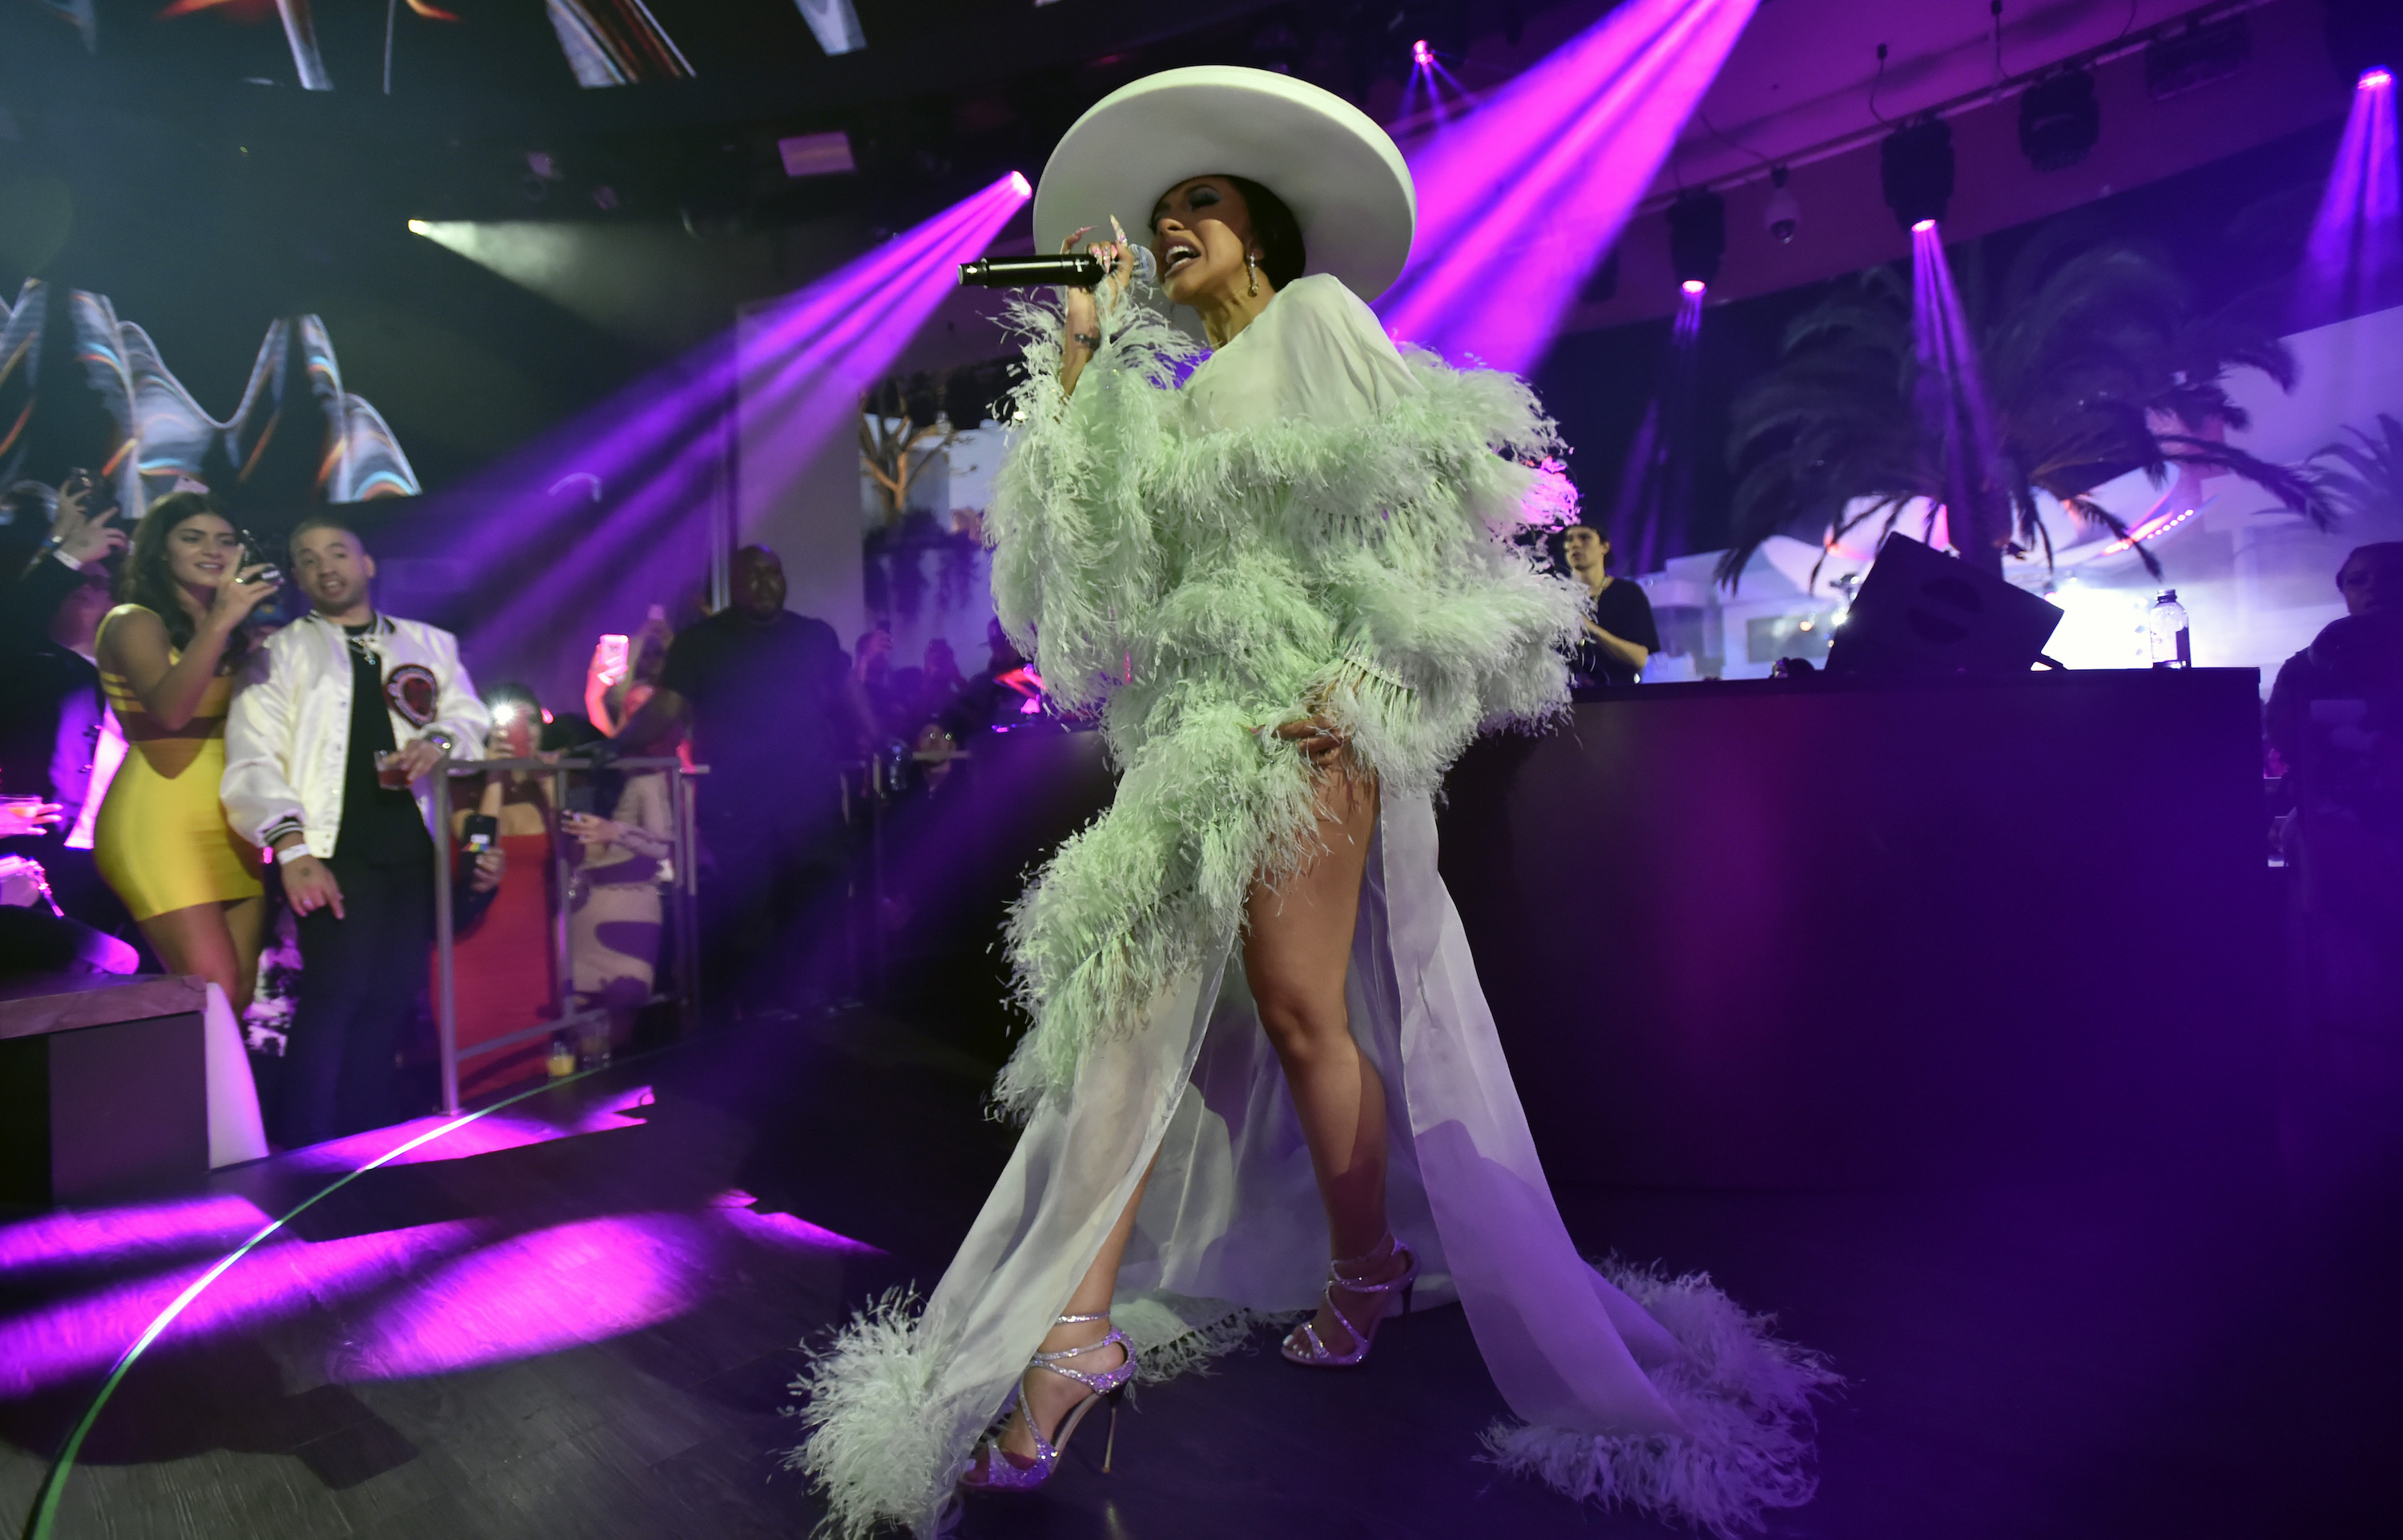  Cardi B performs during the grand opening of KAOS Dayclub & Nightclub at Palms Casino Resort on April 06, 2019 in Las Vegas, Nevada. (Photo by David Becker/Getty Images for Palms Casino Resort)